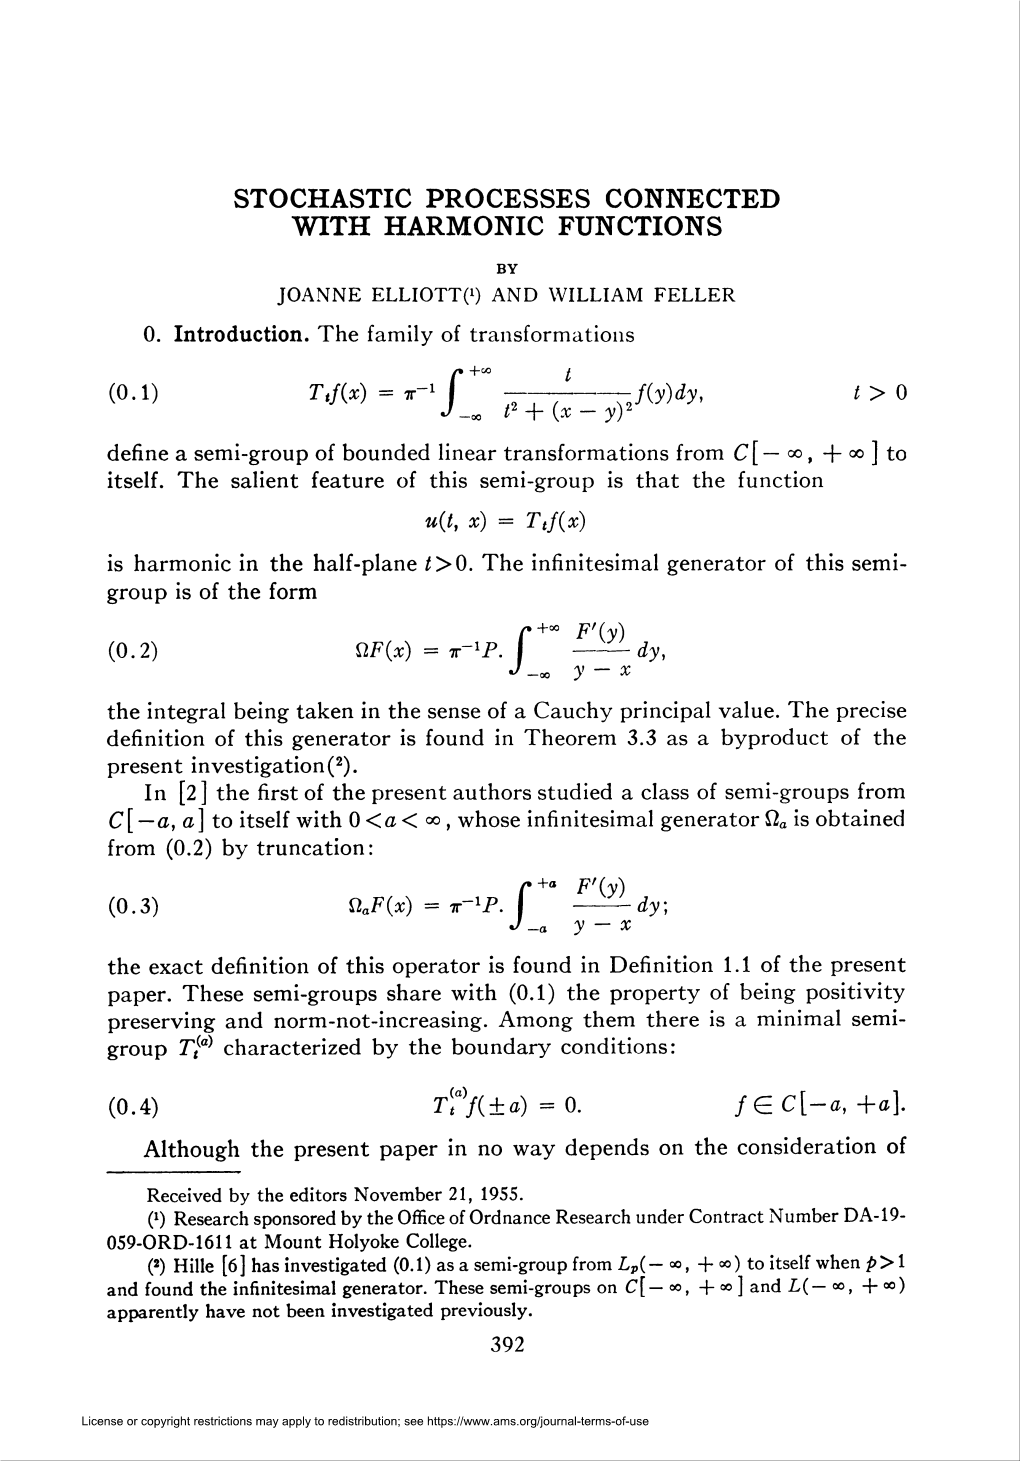 Stochastic Processes Connected with Harmonic Functions